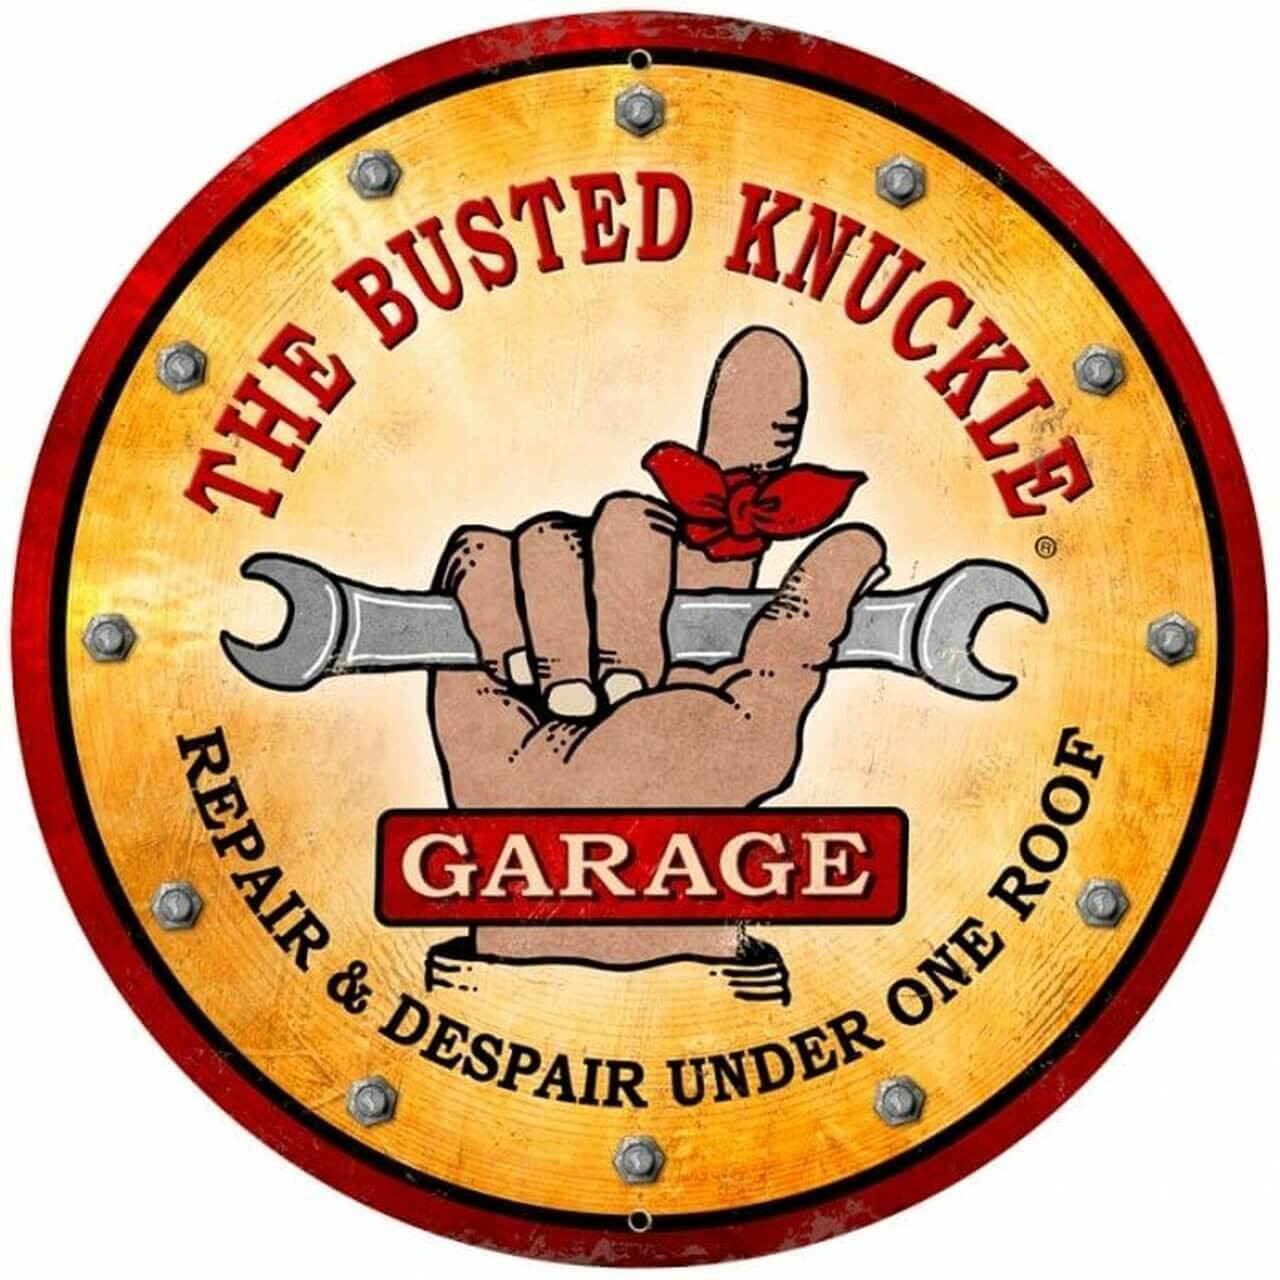 Retro Busted Knuckle Garage Round Metal Sign 28 x 28 Inches